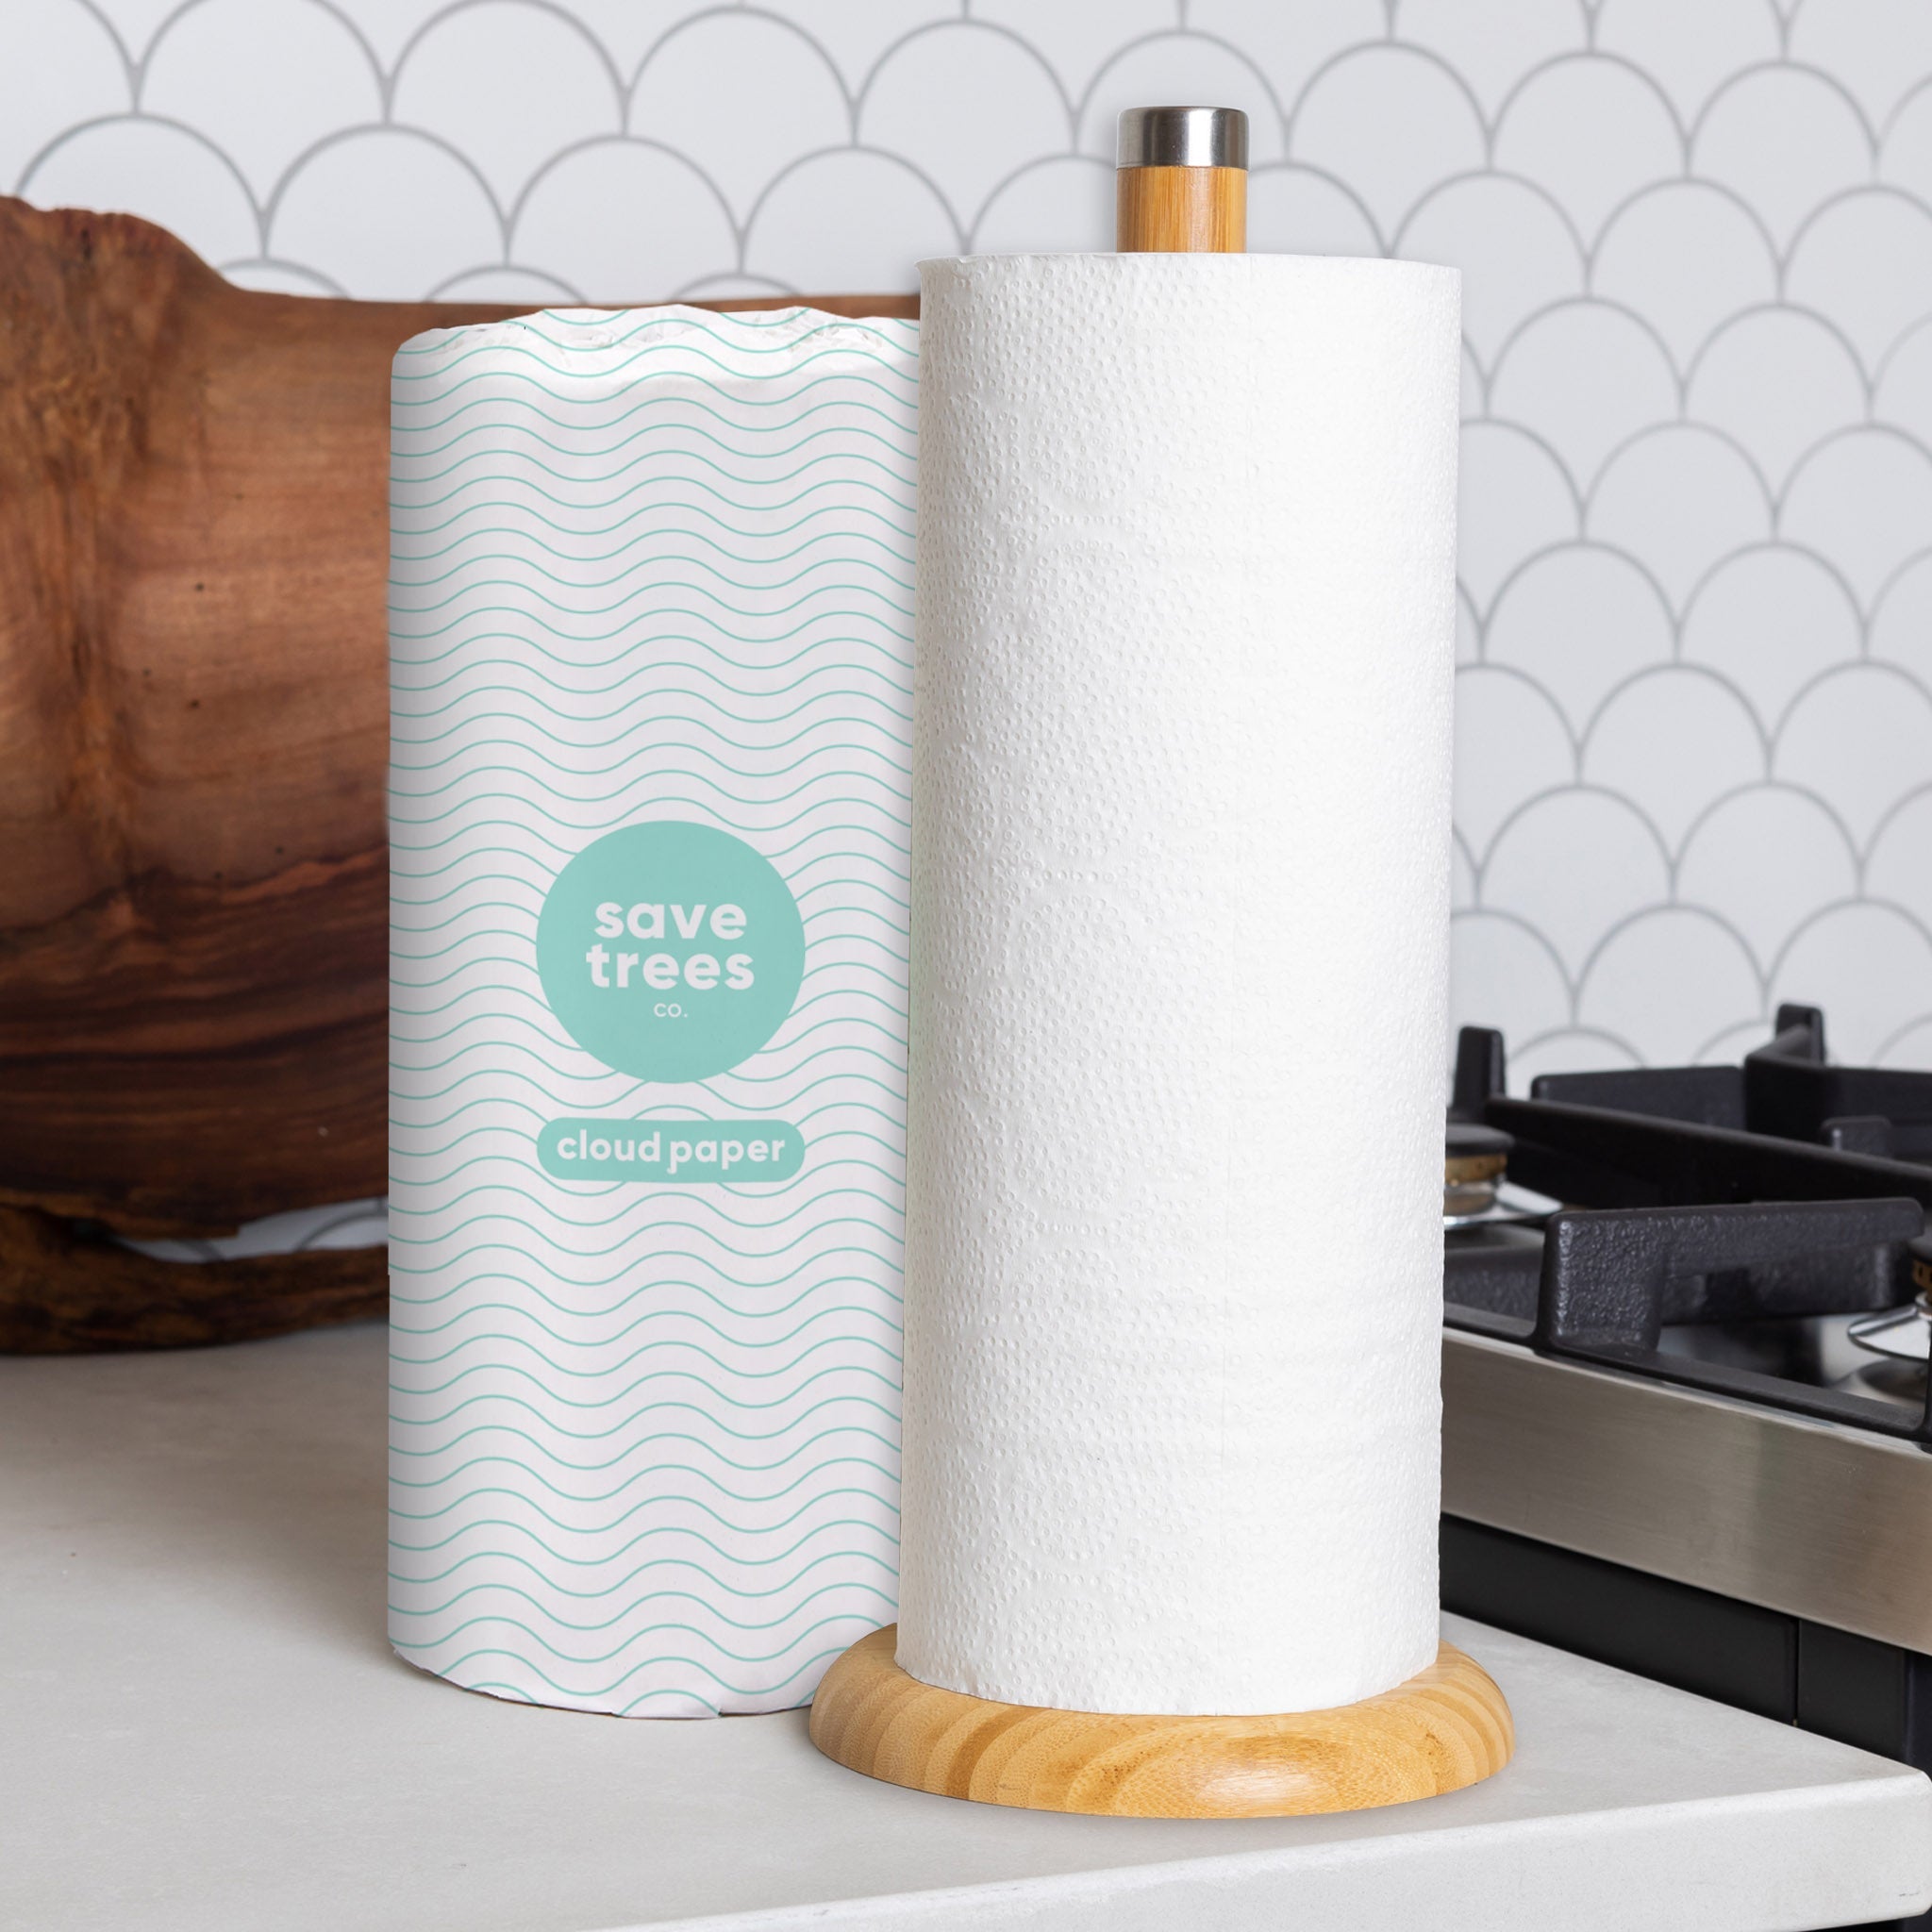 Cloud Paper Bamboo Paper Towels offer a sustainable, eco-friendly alternative. Made from fast-growing bamboo, they're soft, absorbent, & plastic-free! Enjoy convenient subscriptions, free shipping, & feel good about your clean. Shop now & make the switch!